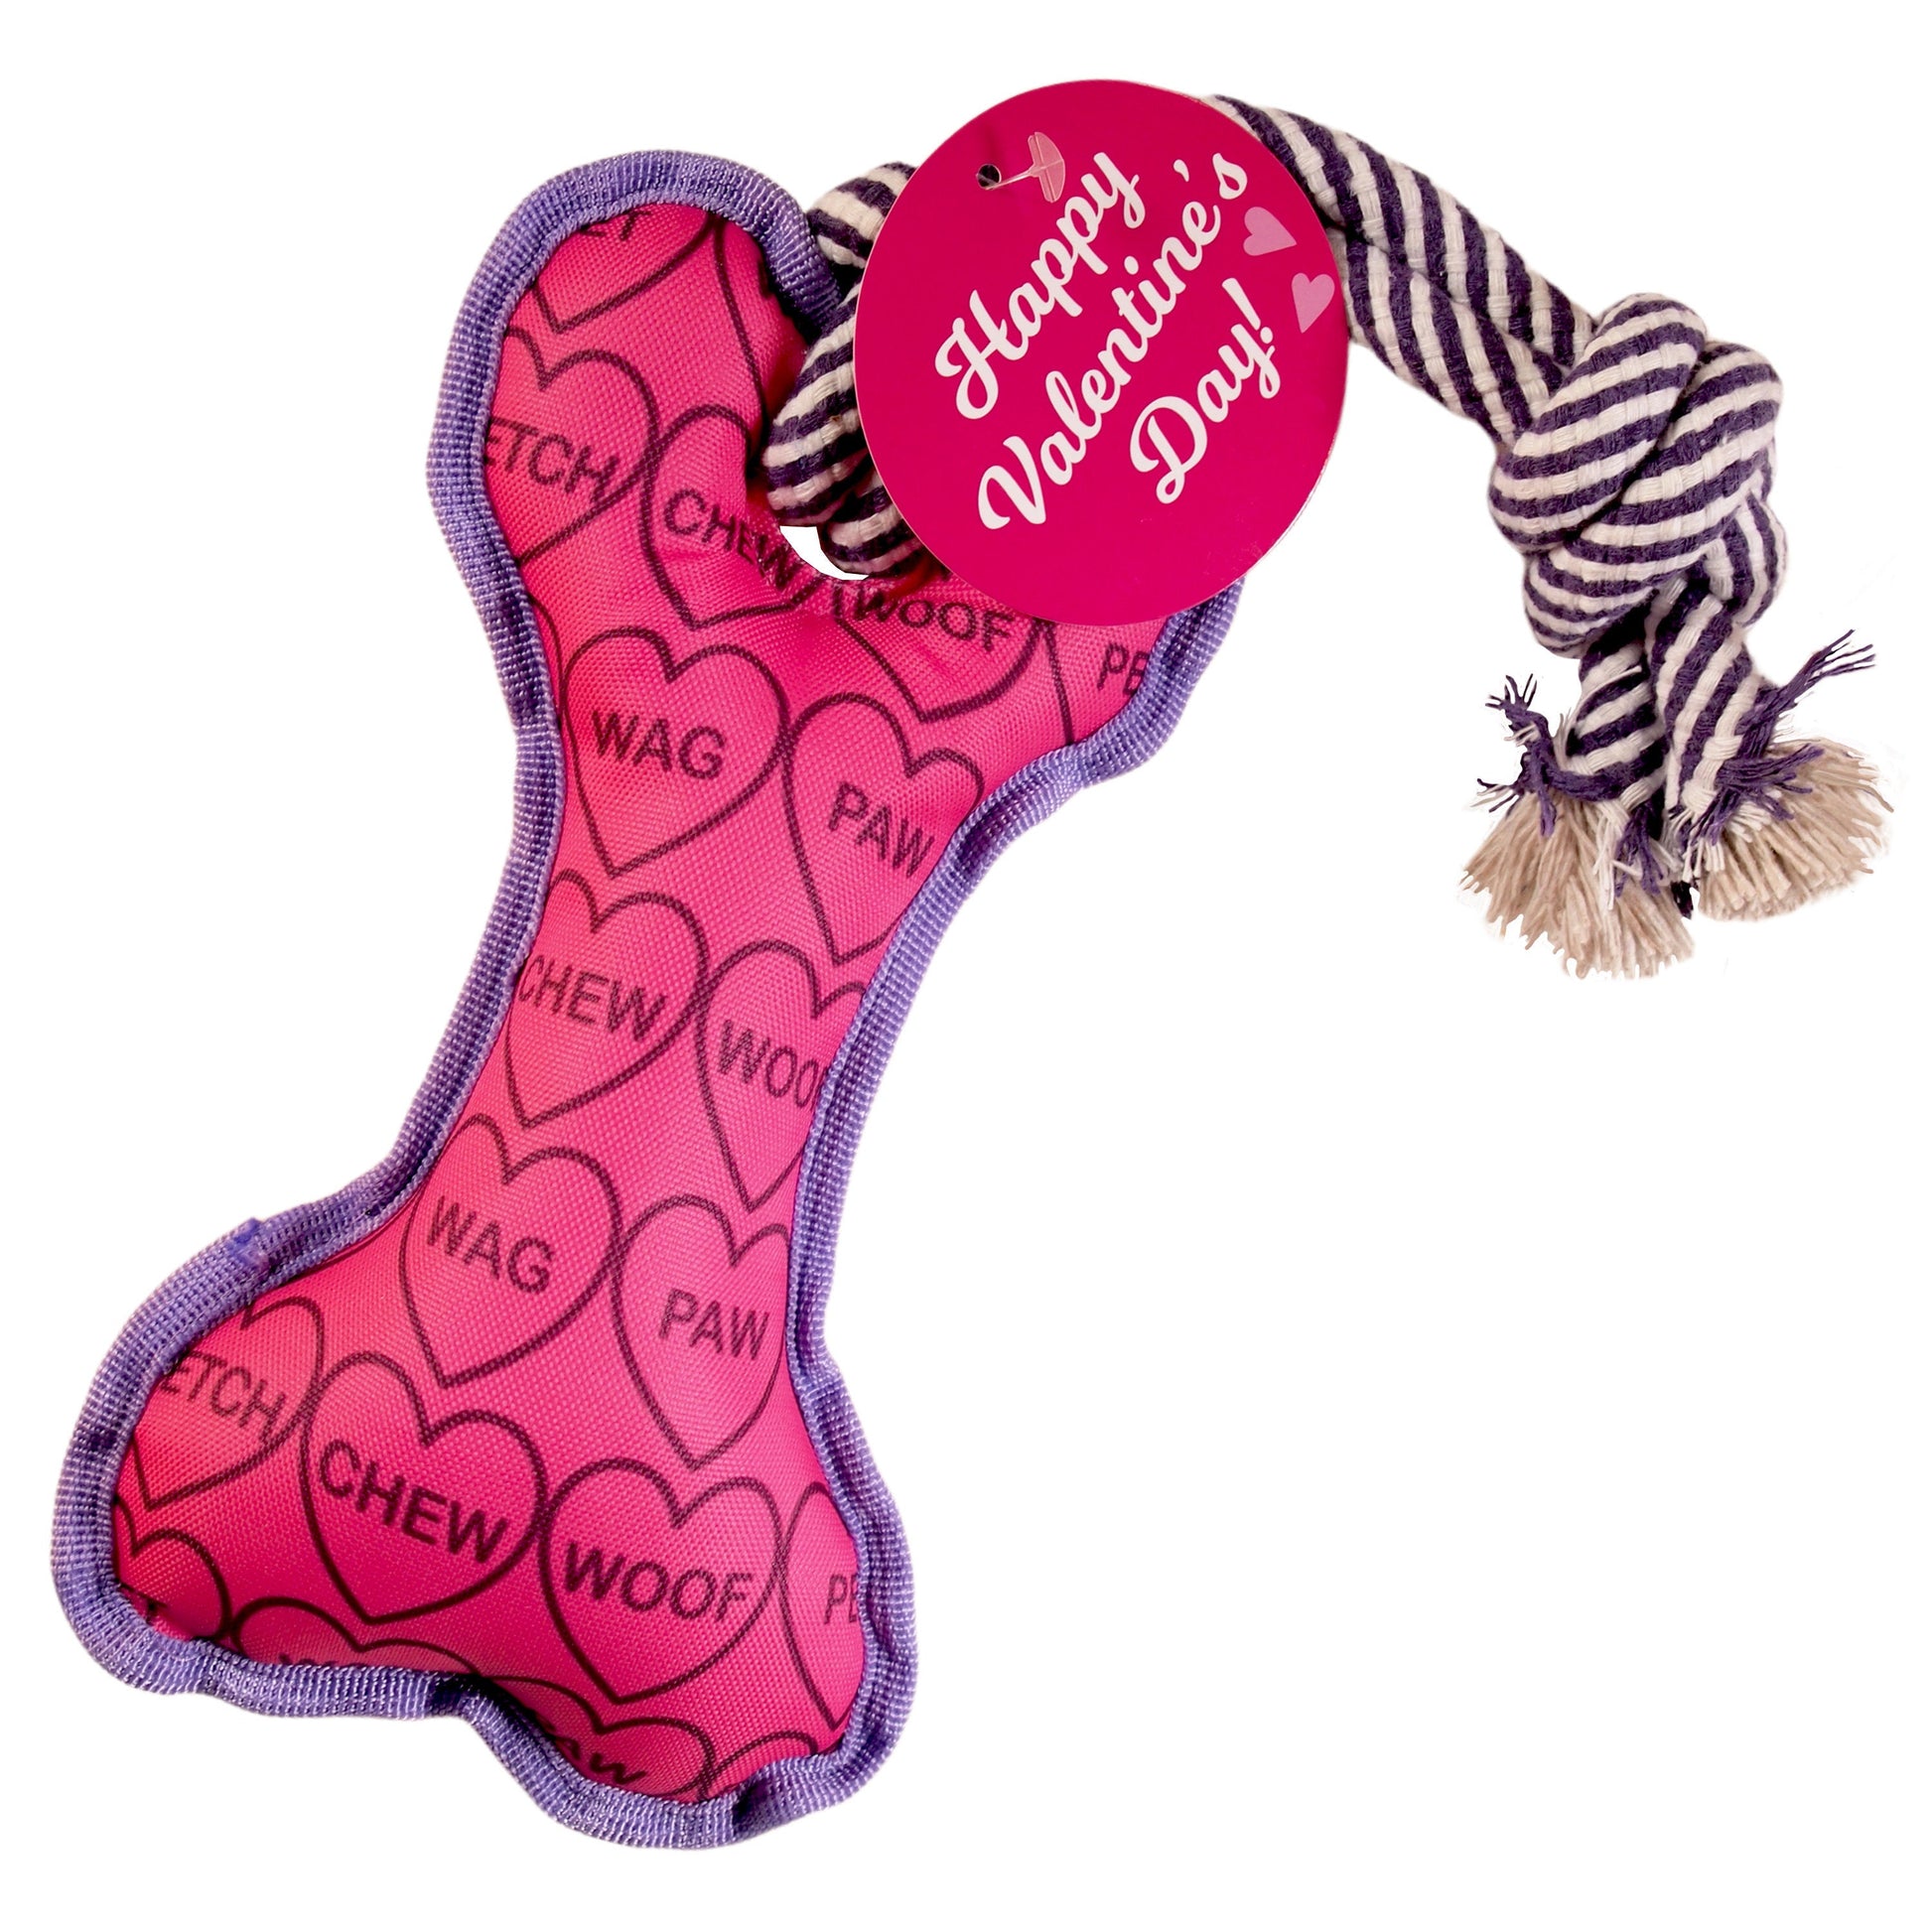 Dog Tug Bone : Candy Hearts theme with additional card - LEAGUE OF CRAFTY CANINES